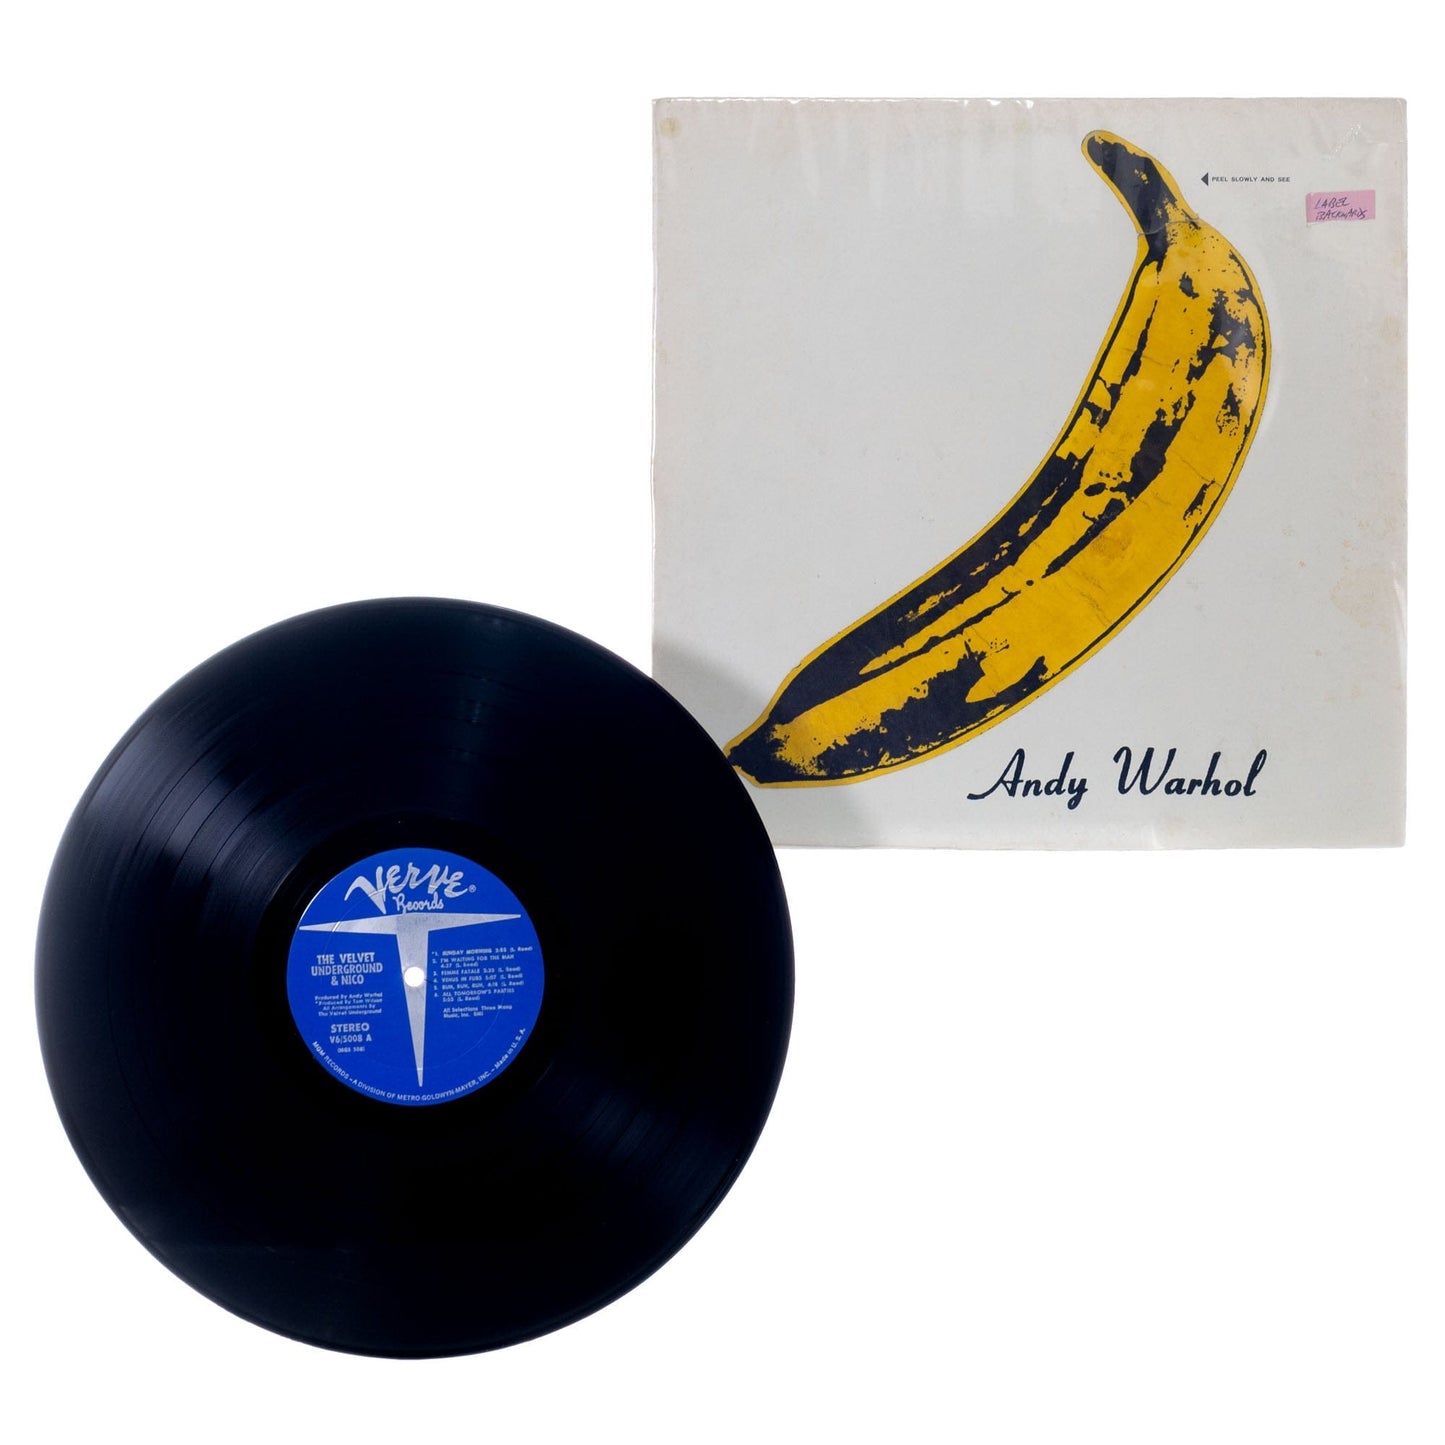 The Velvet Underground & Nico Record Produced By Andy Warhol Banana